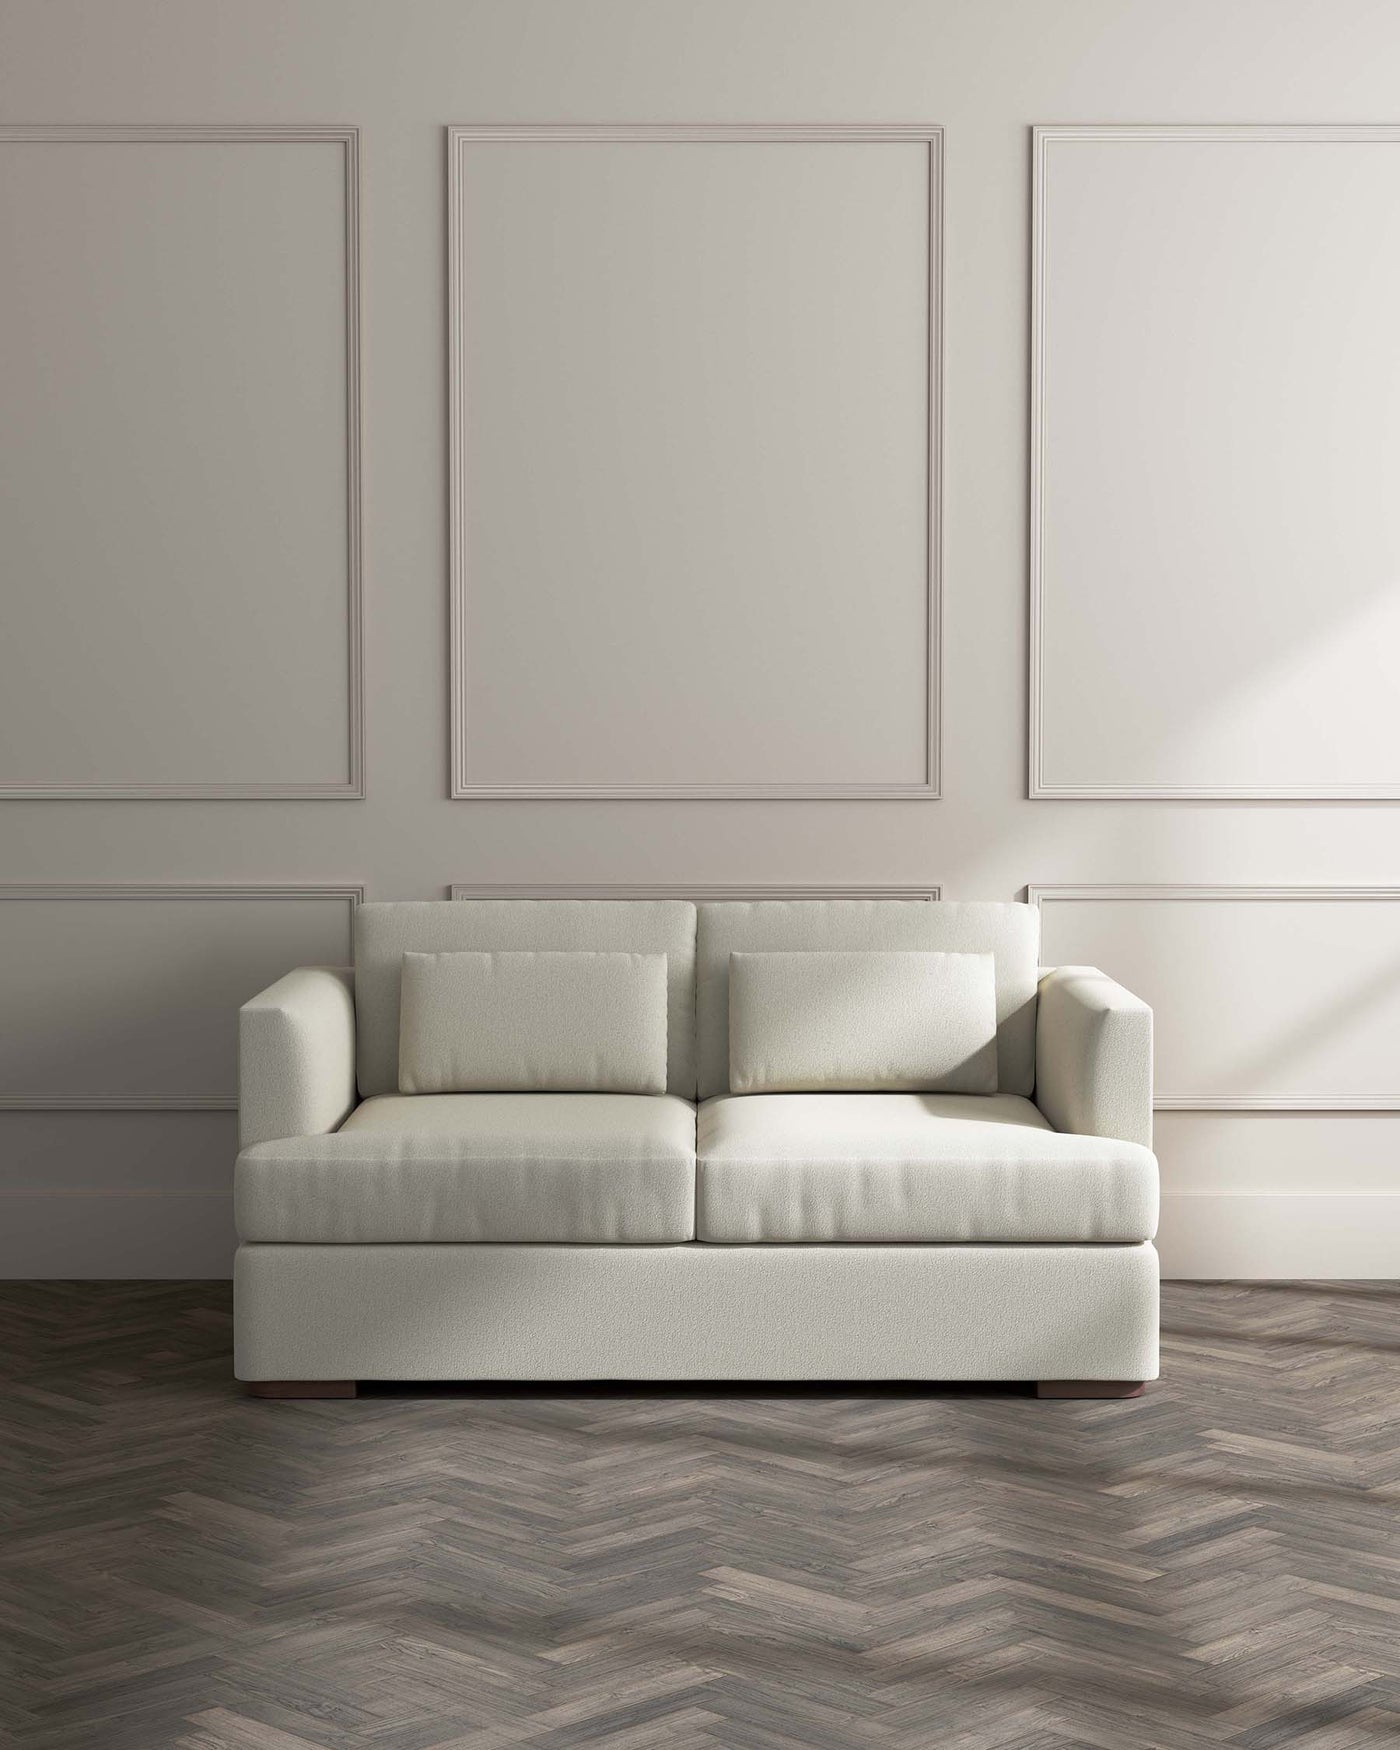 Modern minimalist three-seater sofa with clean lines, upholstered in a light grey fabric, standing on a dark herringbone parquet floor against a light grey wall with subtle panel detailing.